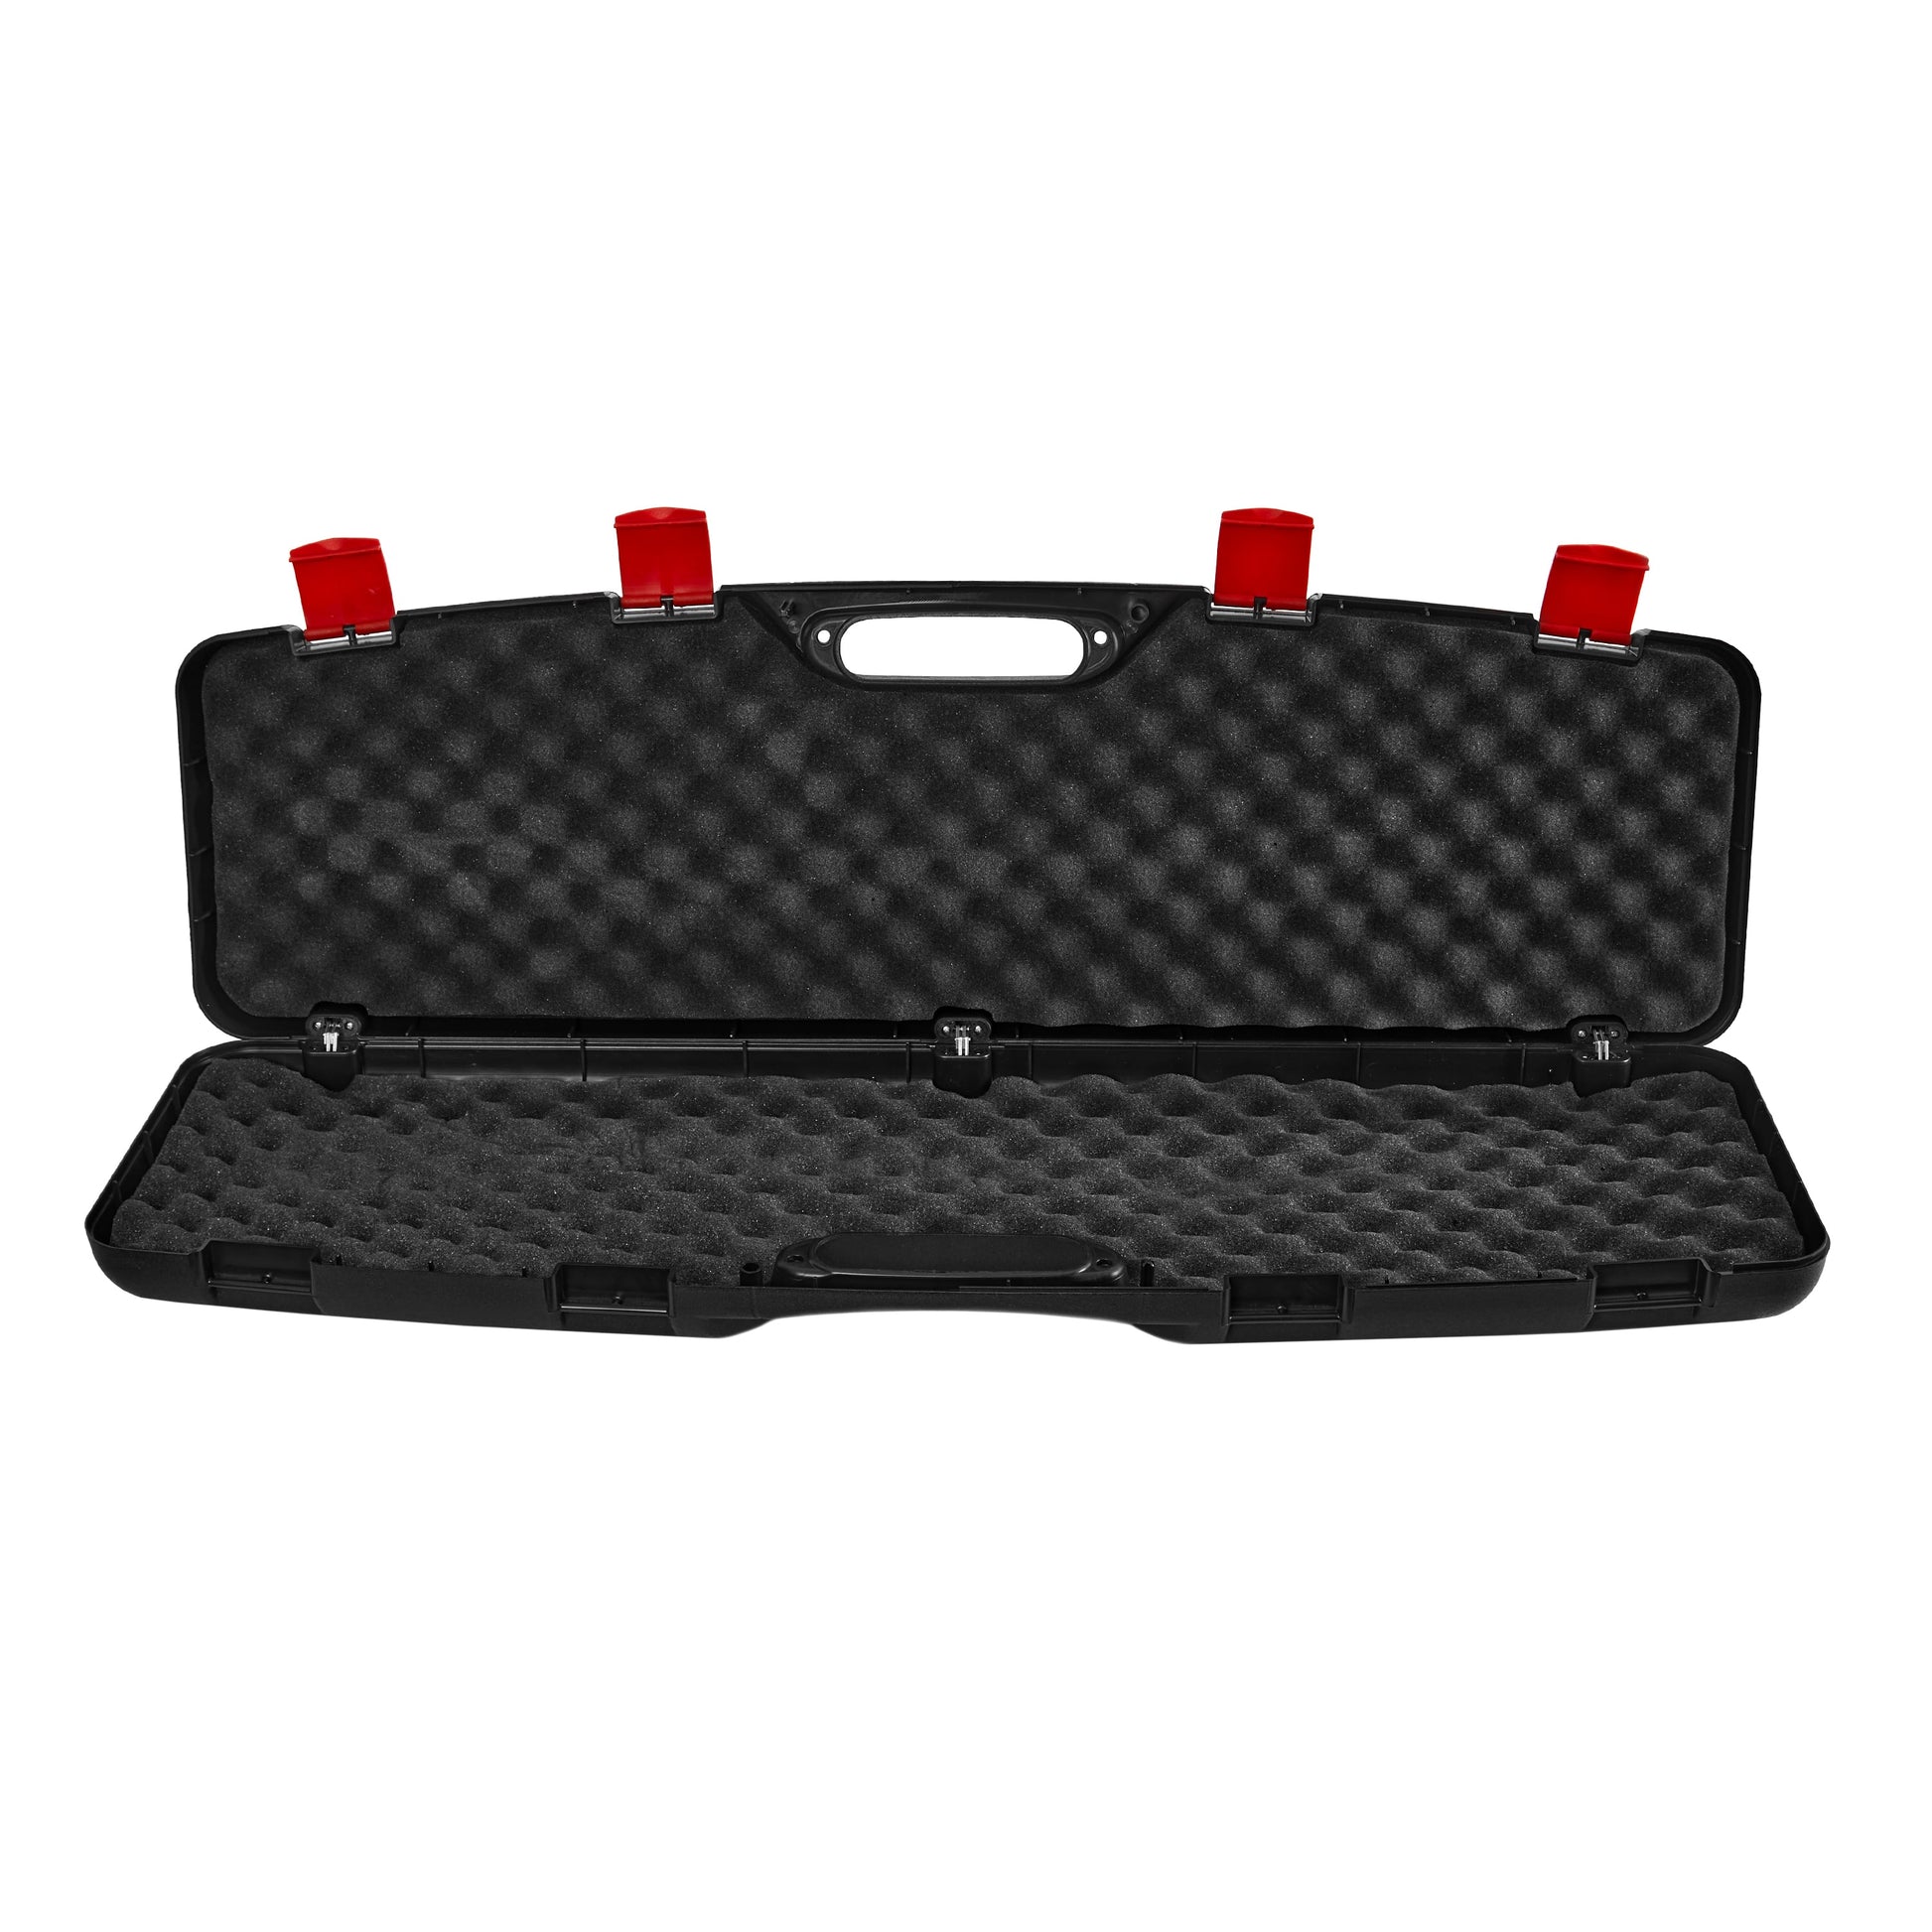 Black Open Air Rifle Carrying Case